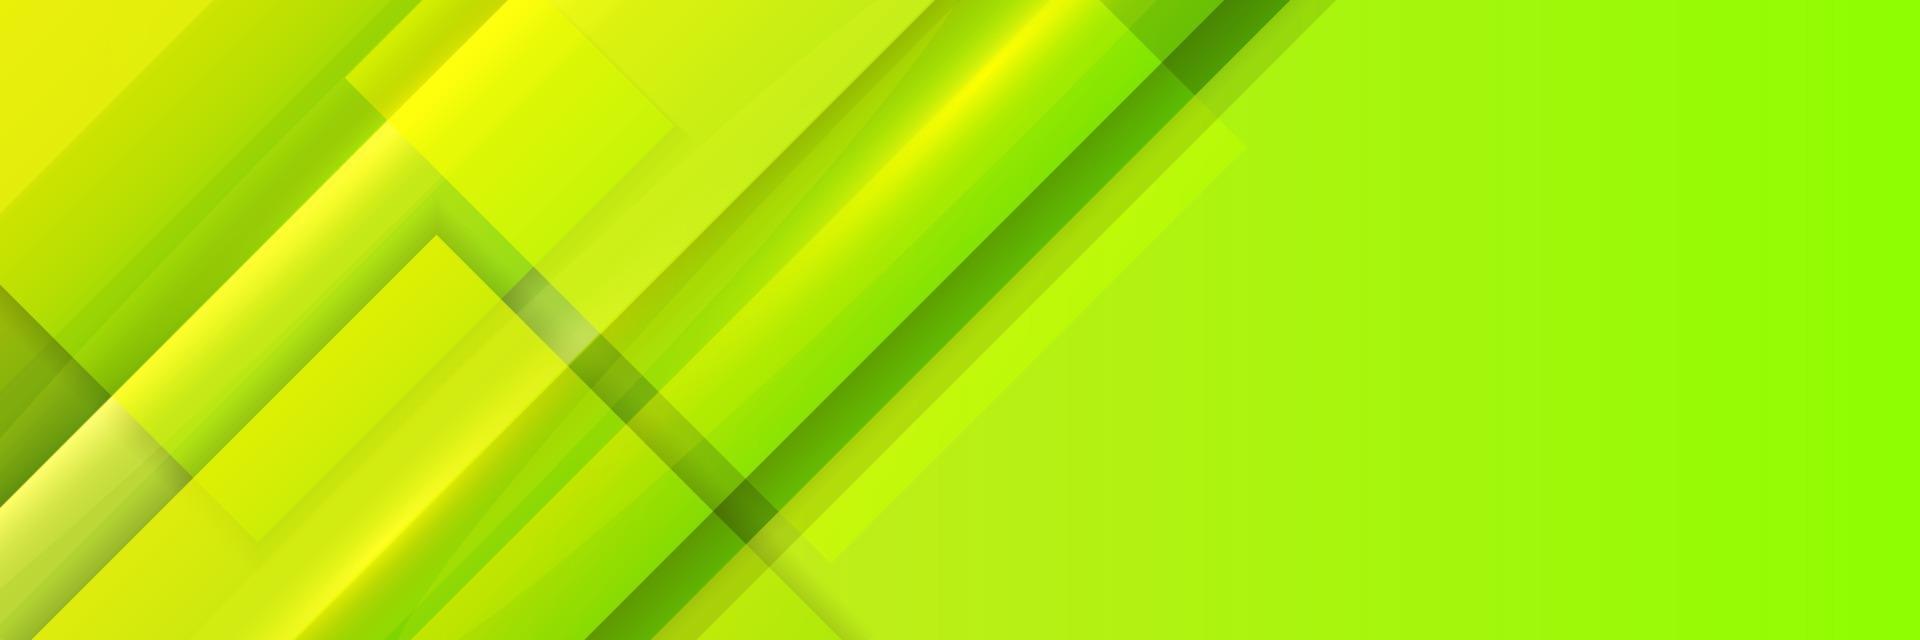 Abstract Green Geometric Banner Background vector